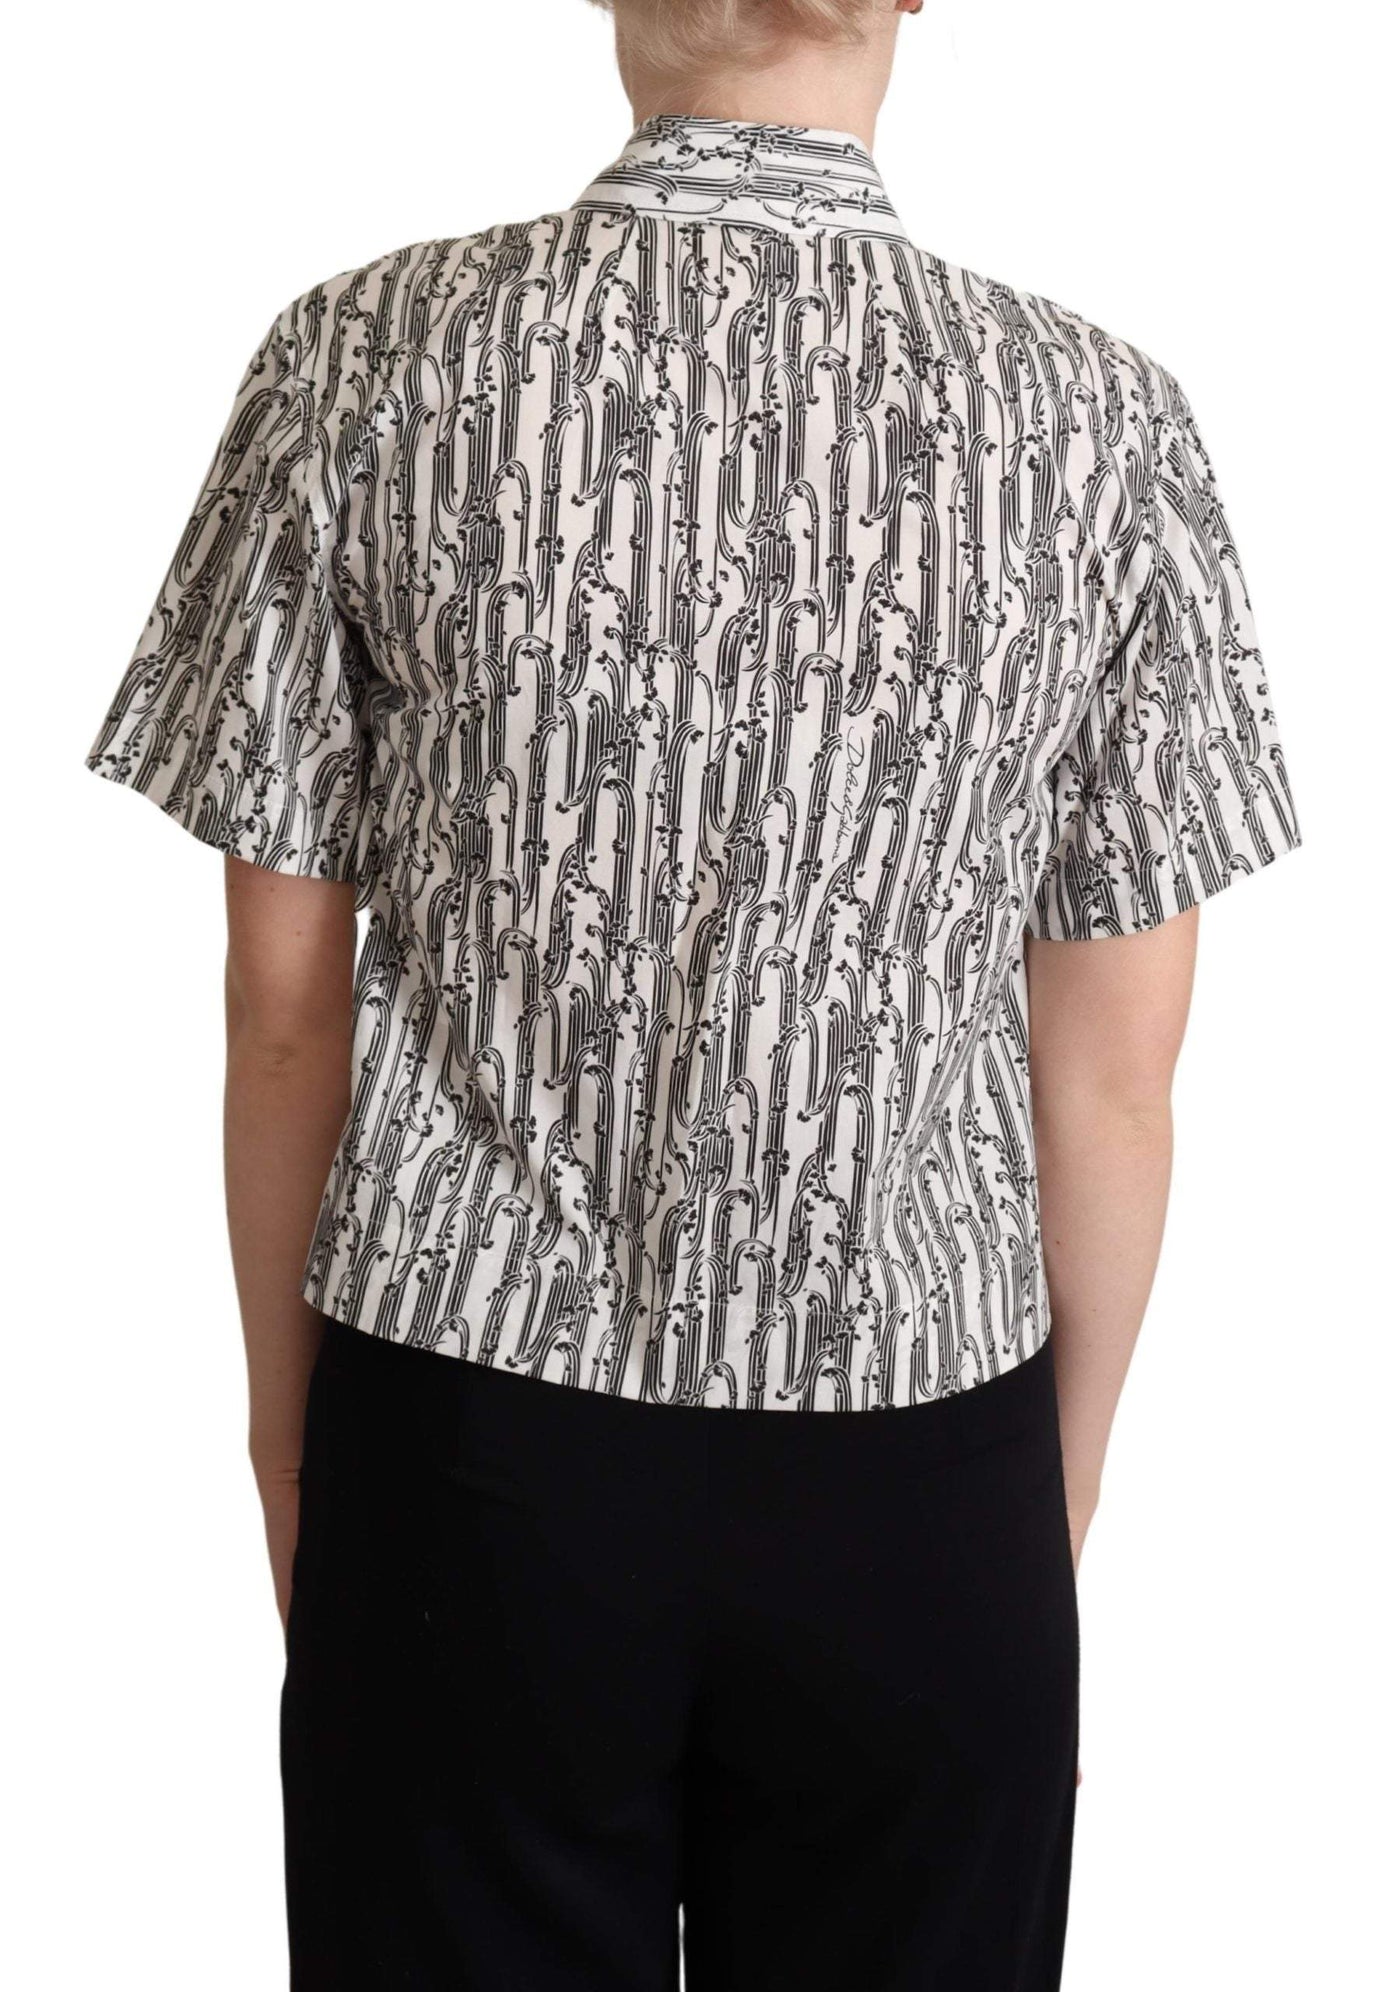 Dolce & Gabbana White Floral Collared Blouse Shirt Black/White, Dolce & Gabbana, feed-agegroup-adult, feed-color-Black, feed-gender-female, IT38|XS, IT40|S, IT42|M, IT44|L, IT46|XL, Shirts - Women - Clothing at SEYMAYKA